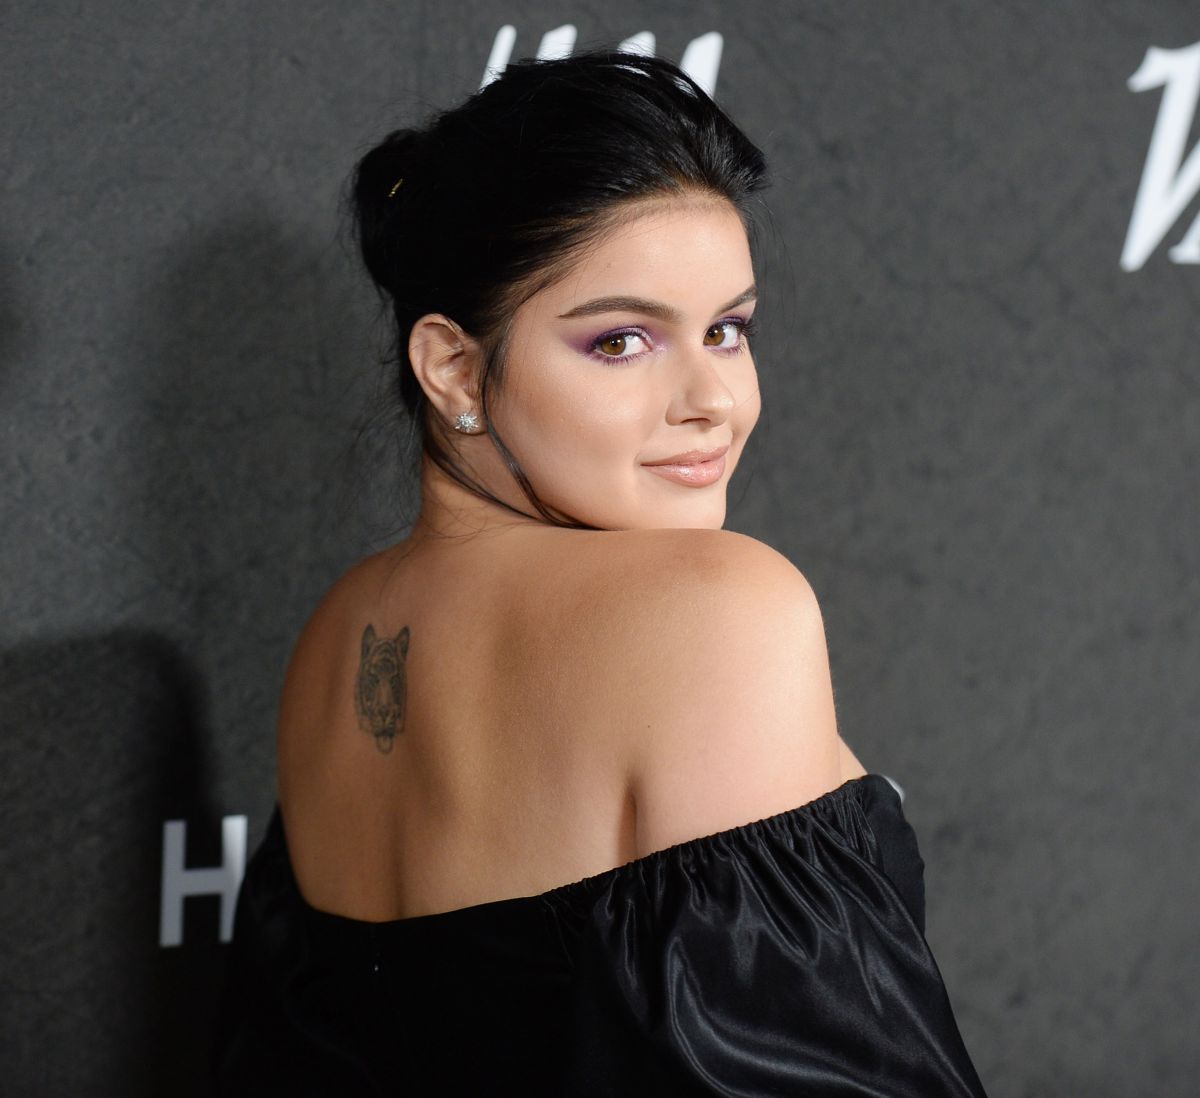 Ariel Winter at Variety’s Power of Young Hollywood Party in Los Angeles